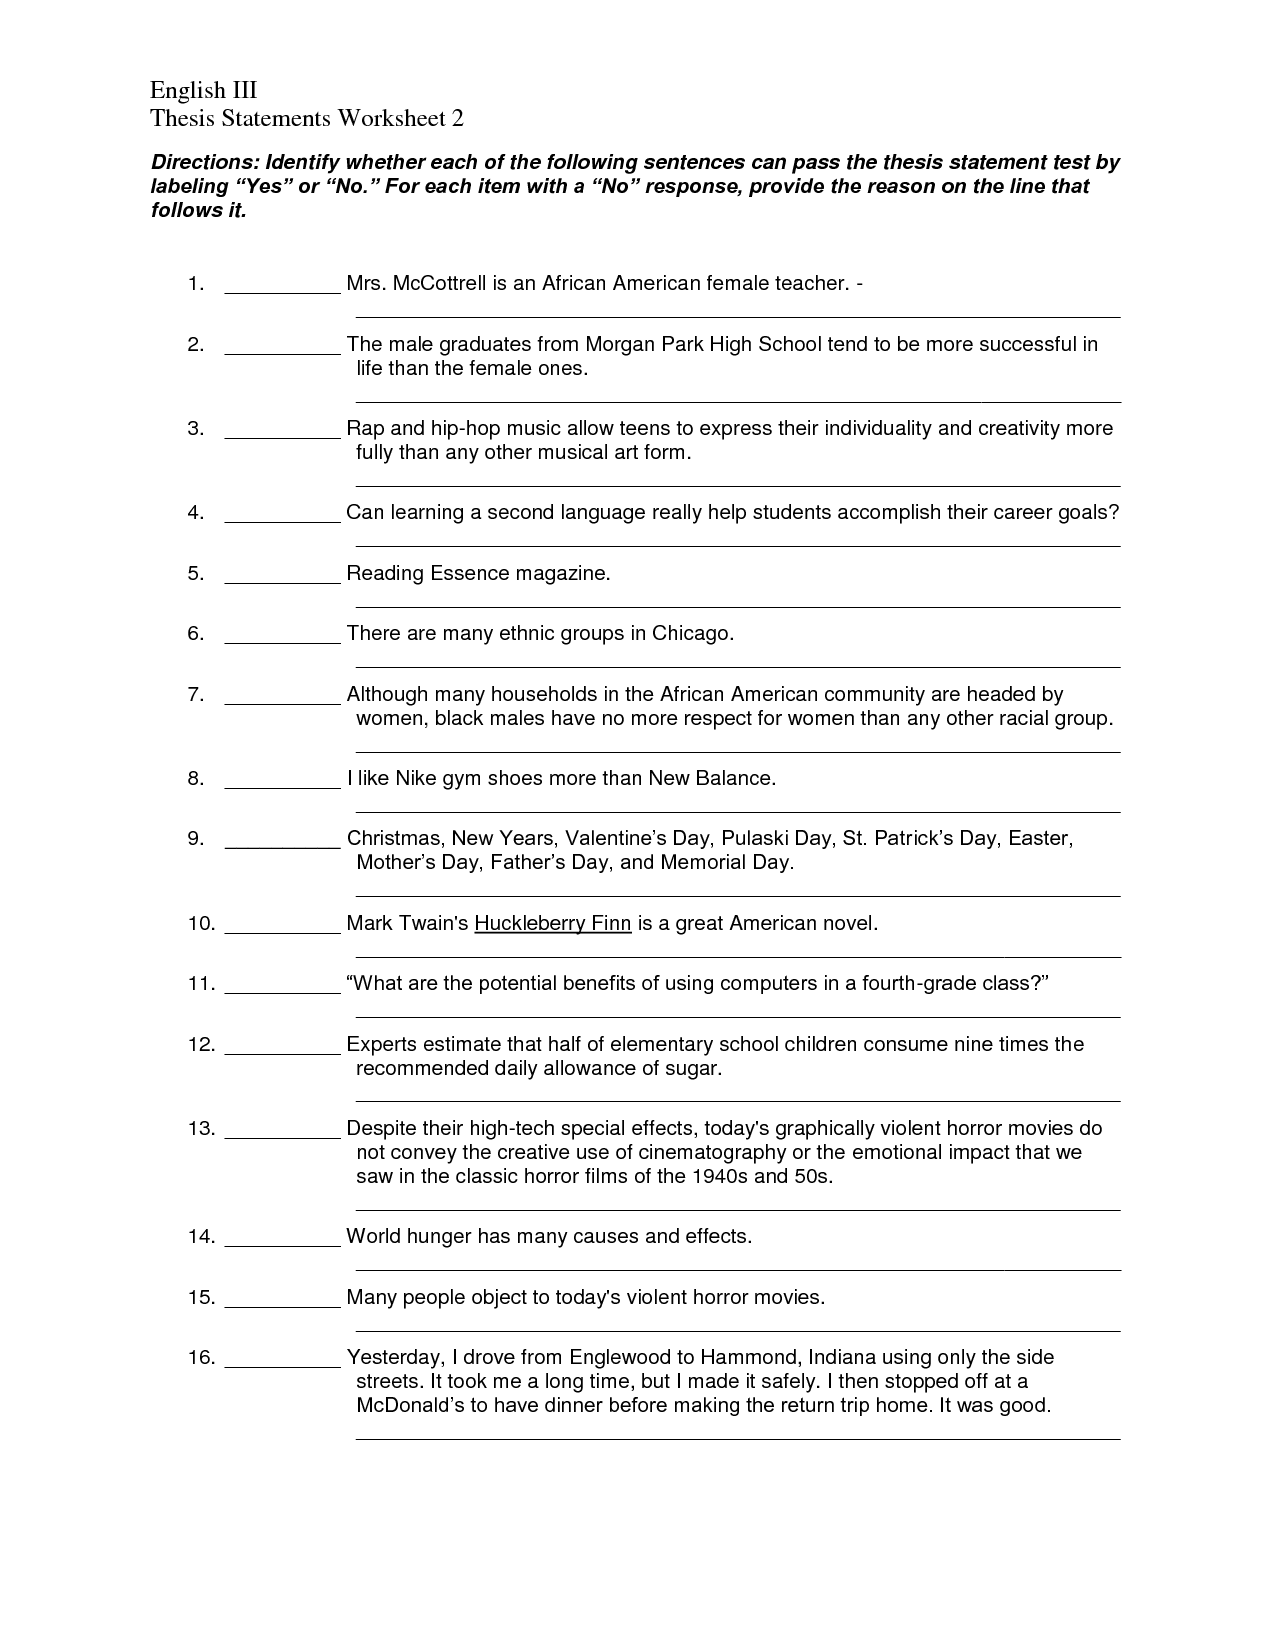 Writing a Thesis Statement Worksheet Middle School Image